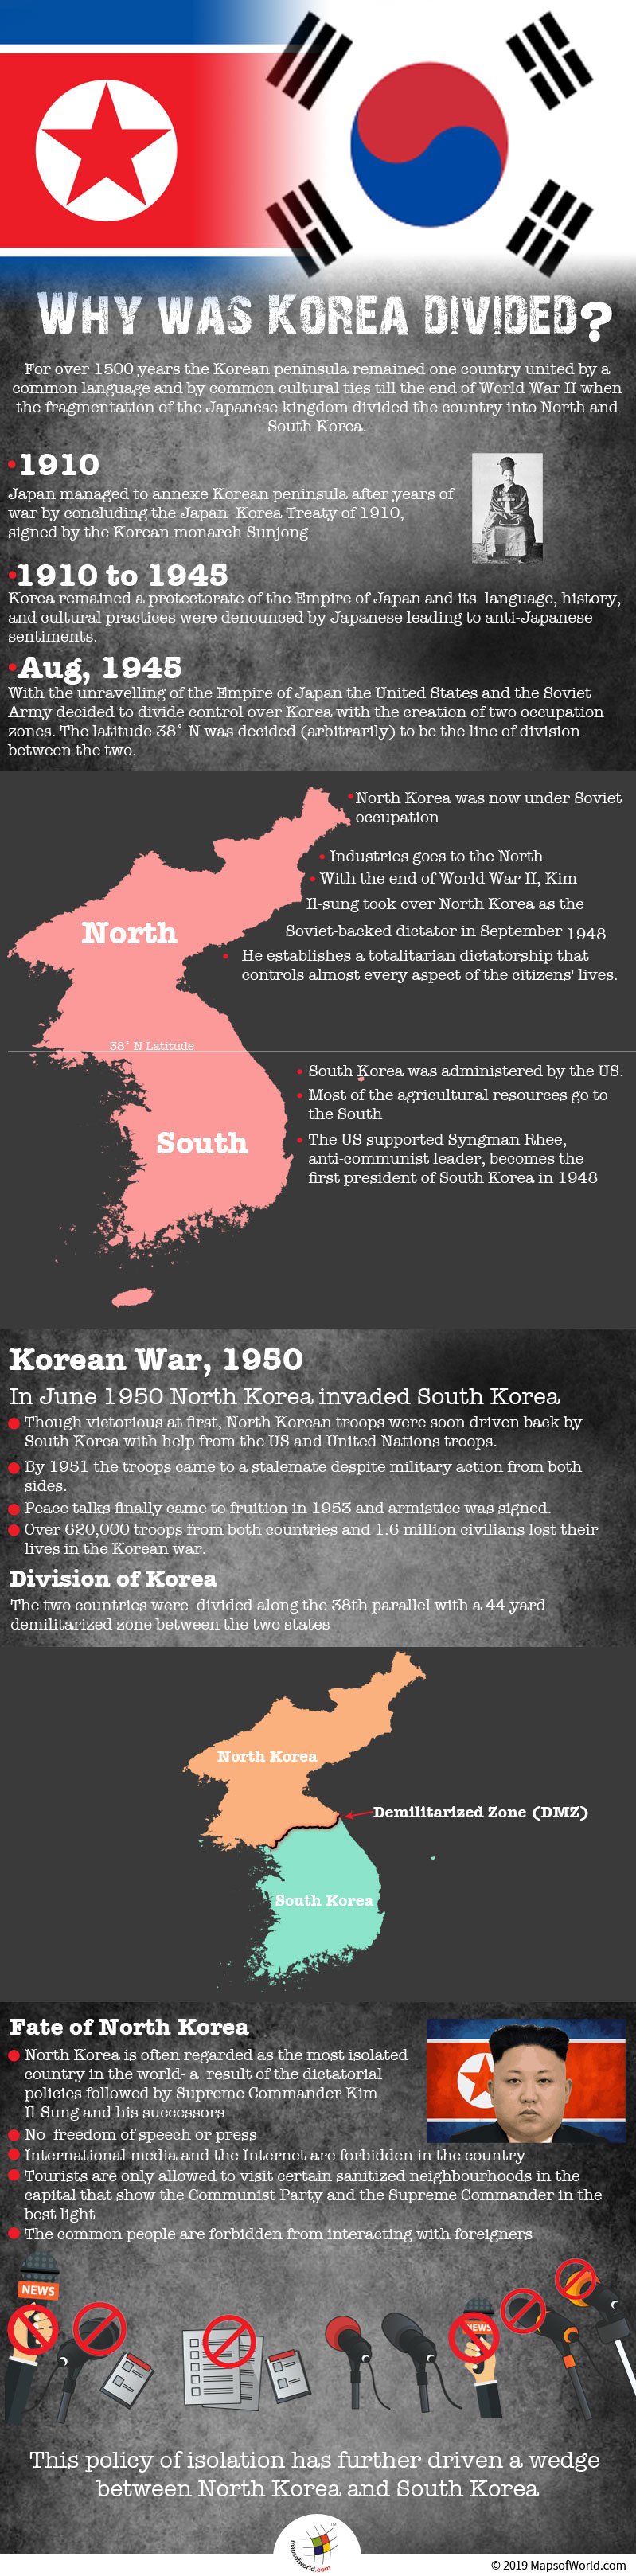 Infographic Giving Information on Division of Korea